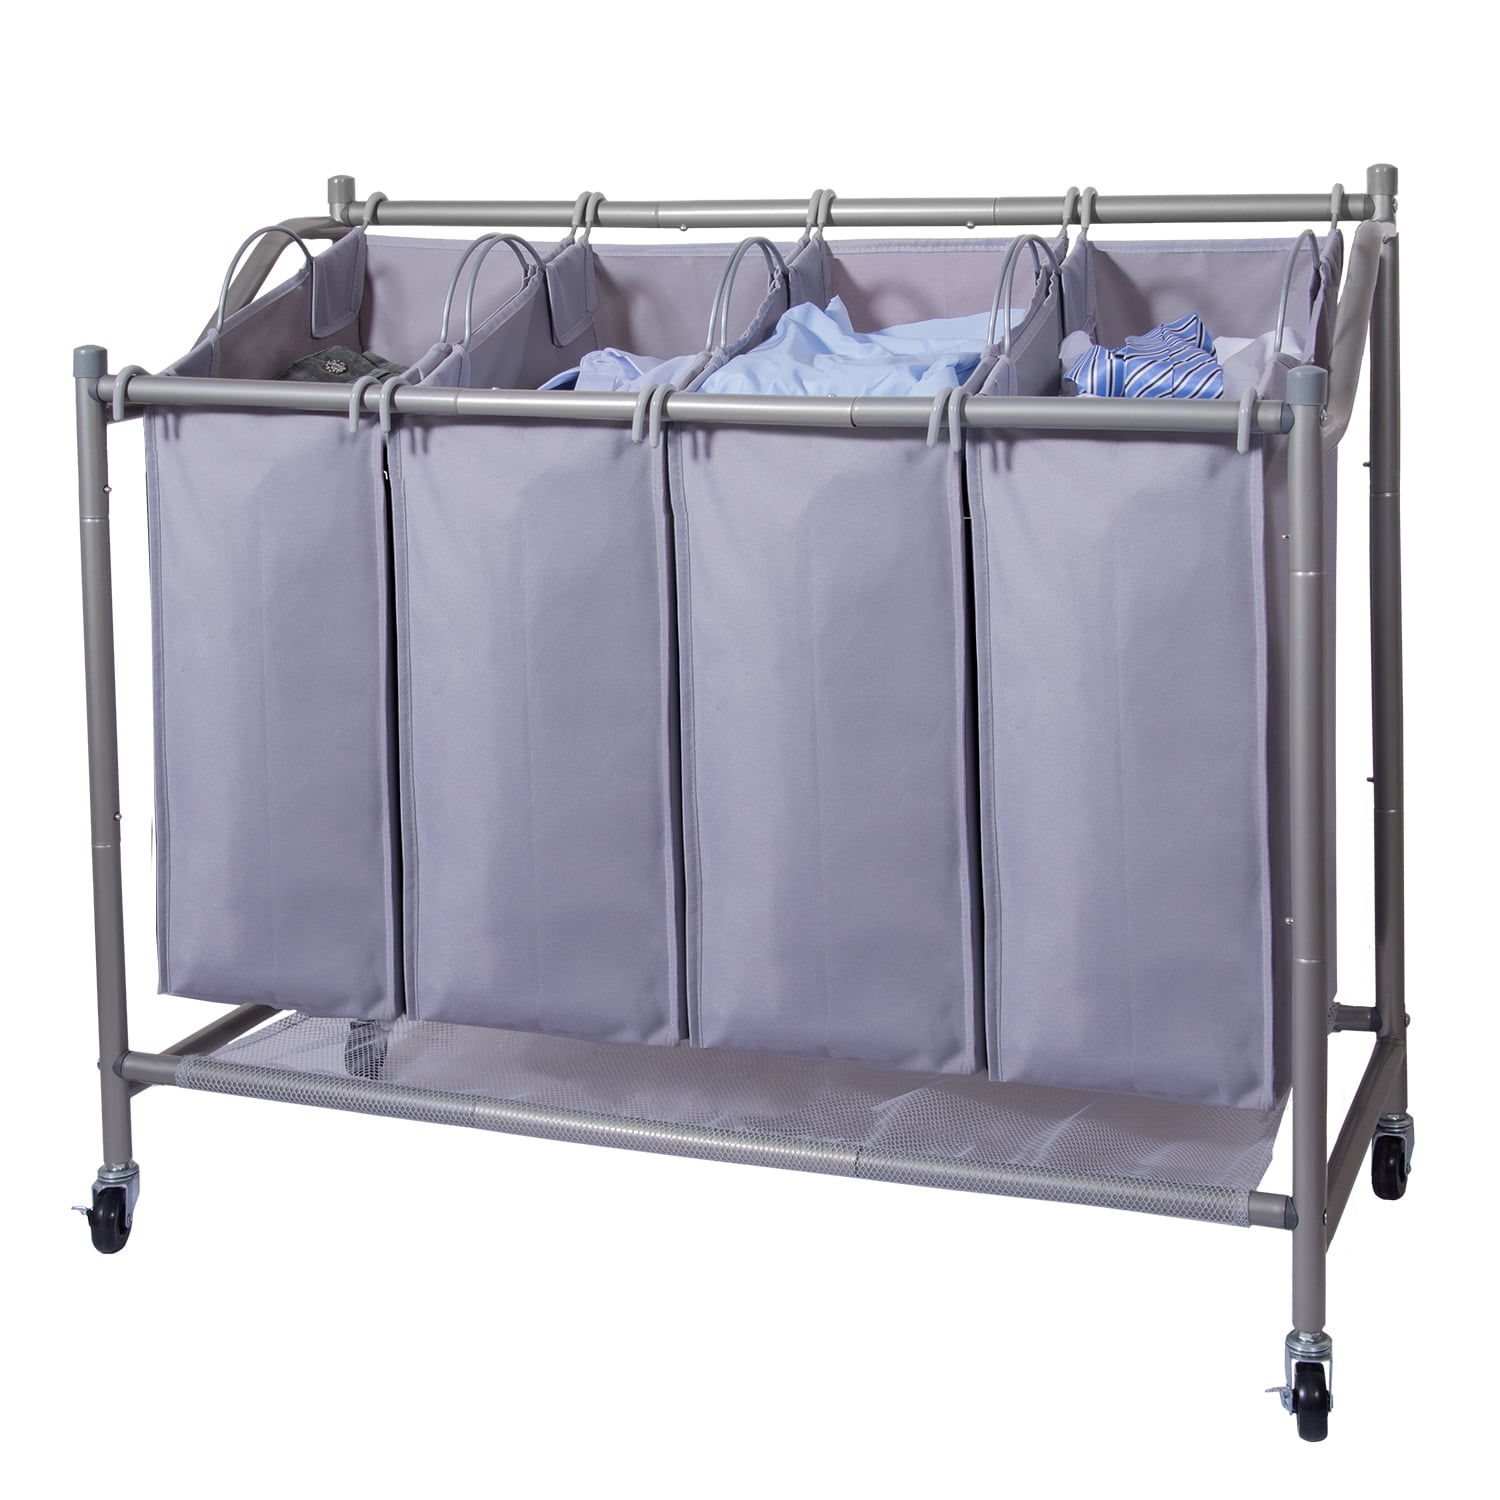 Gray Laundry Sorter 3 Bag Laundry Hamper Sorter with Rolling Heavy Duty Casters 